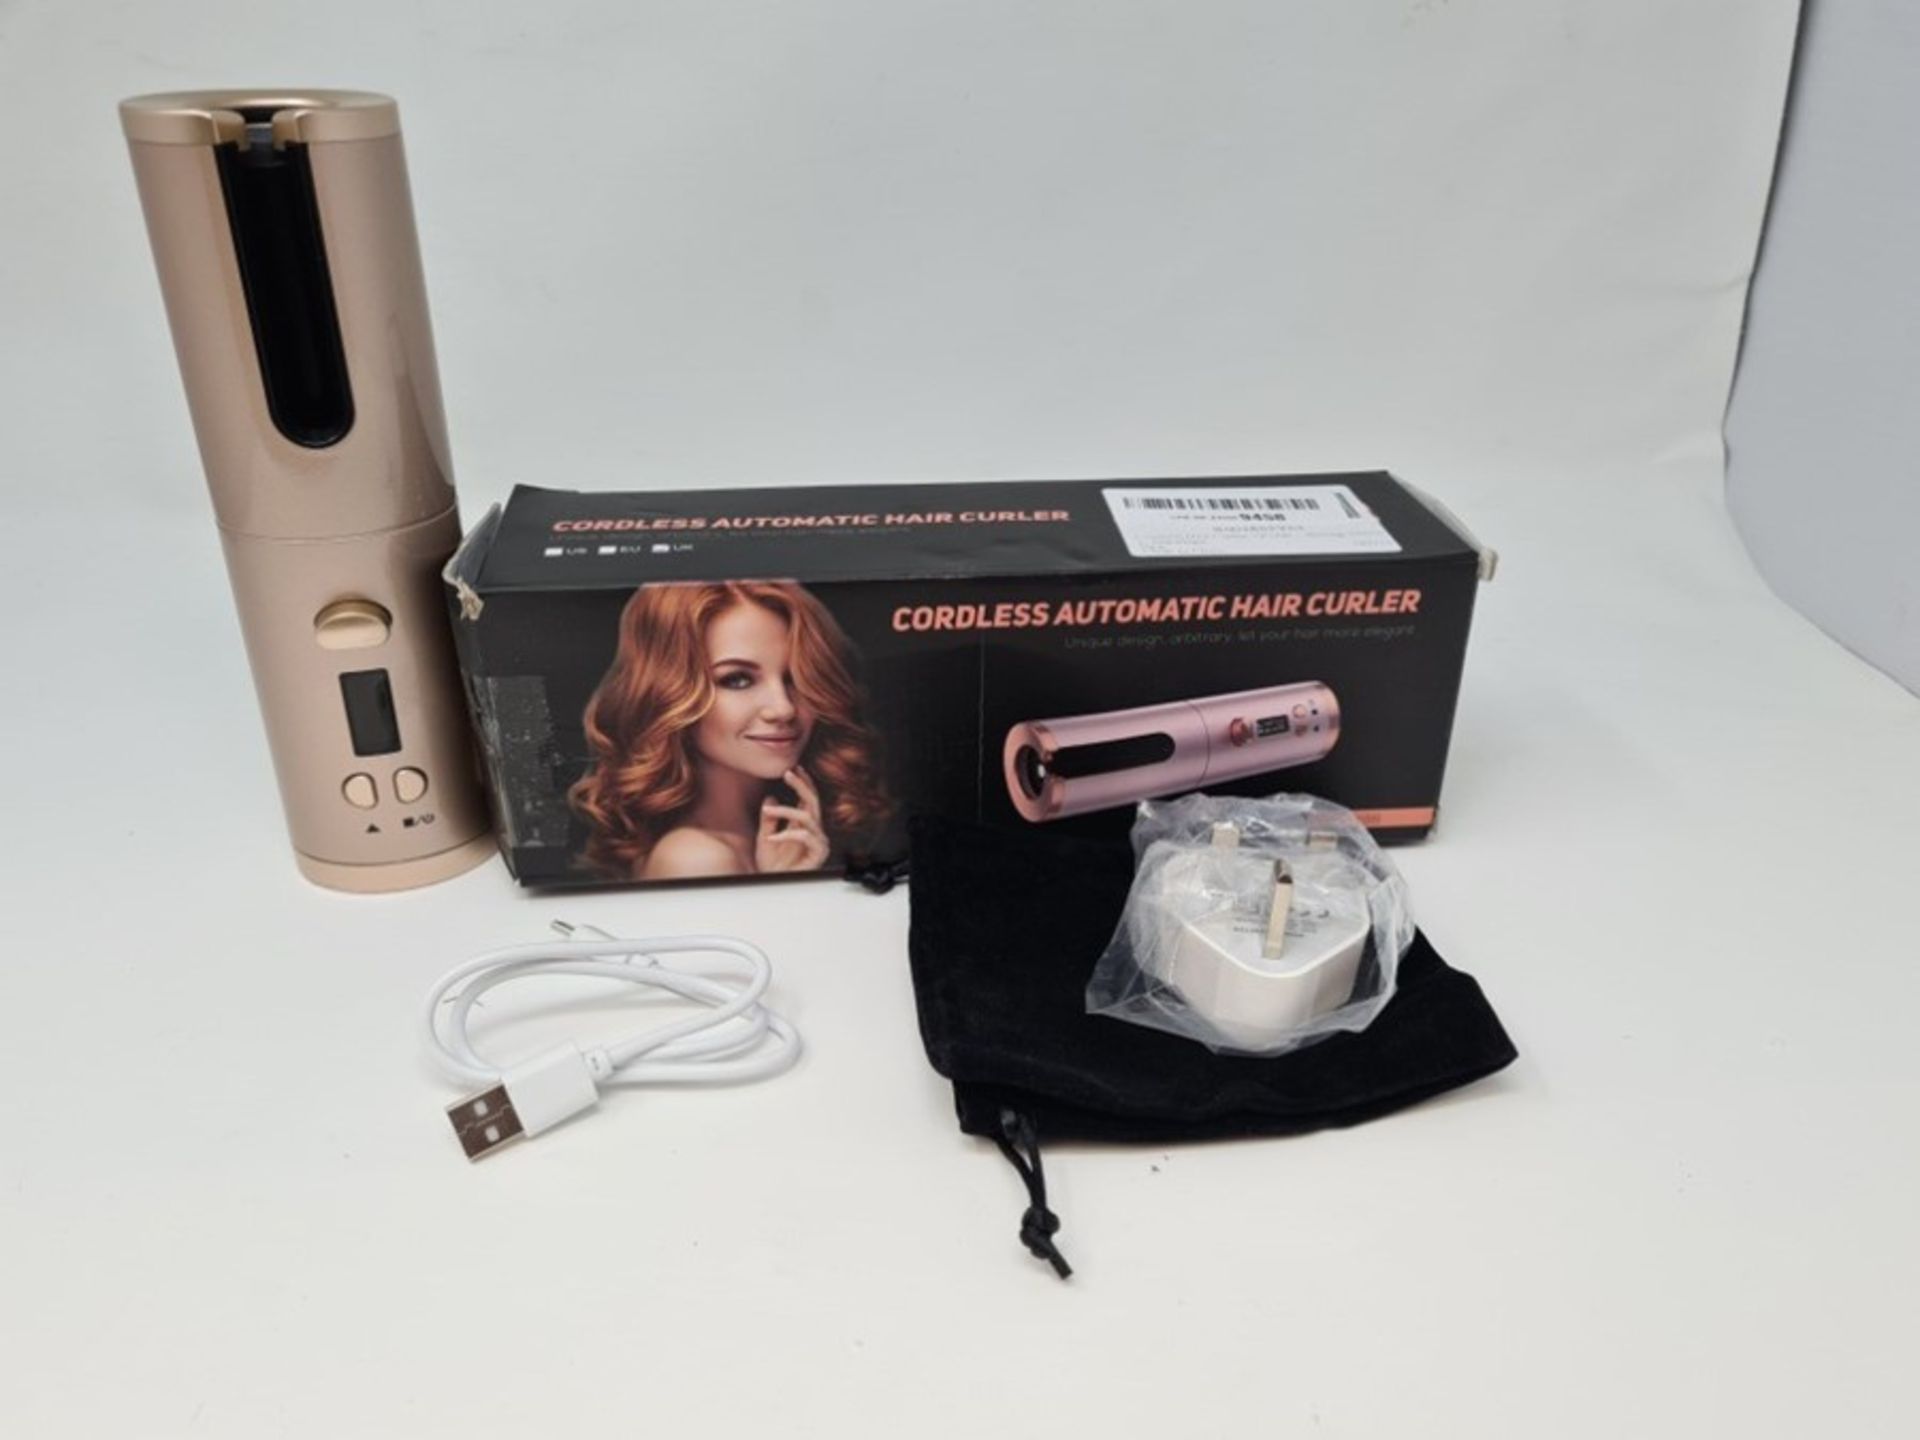 Cordless Hair Curler, QUARED Portable Auto Curling Iron Anti-Tangle, LCD Display, USB - Image 2 of 2